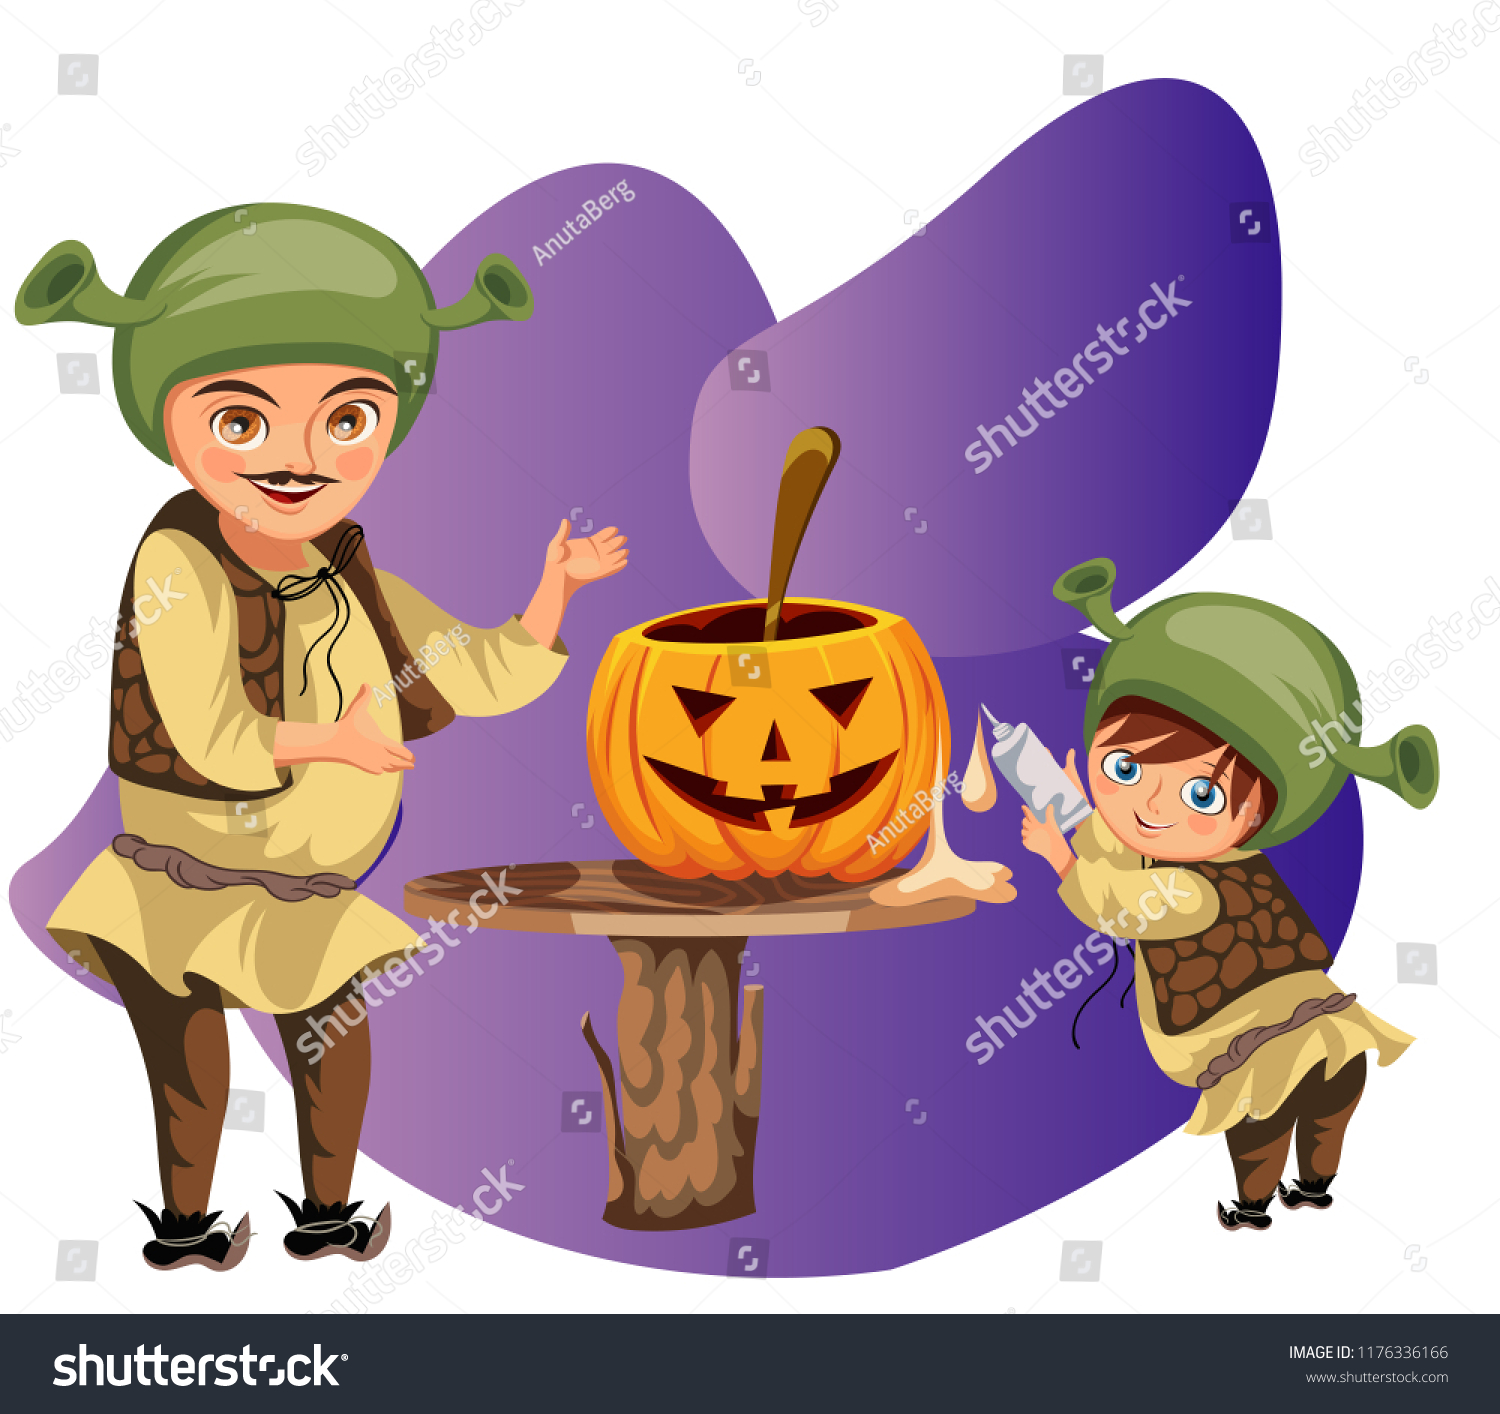 SVG of Dad with son making Halloween pumpkin poster. Cartoon father with little sonny dressed shrek costumes and carving mystery gourd vector illustration. Family horror party concept. svg